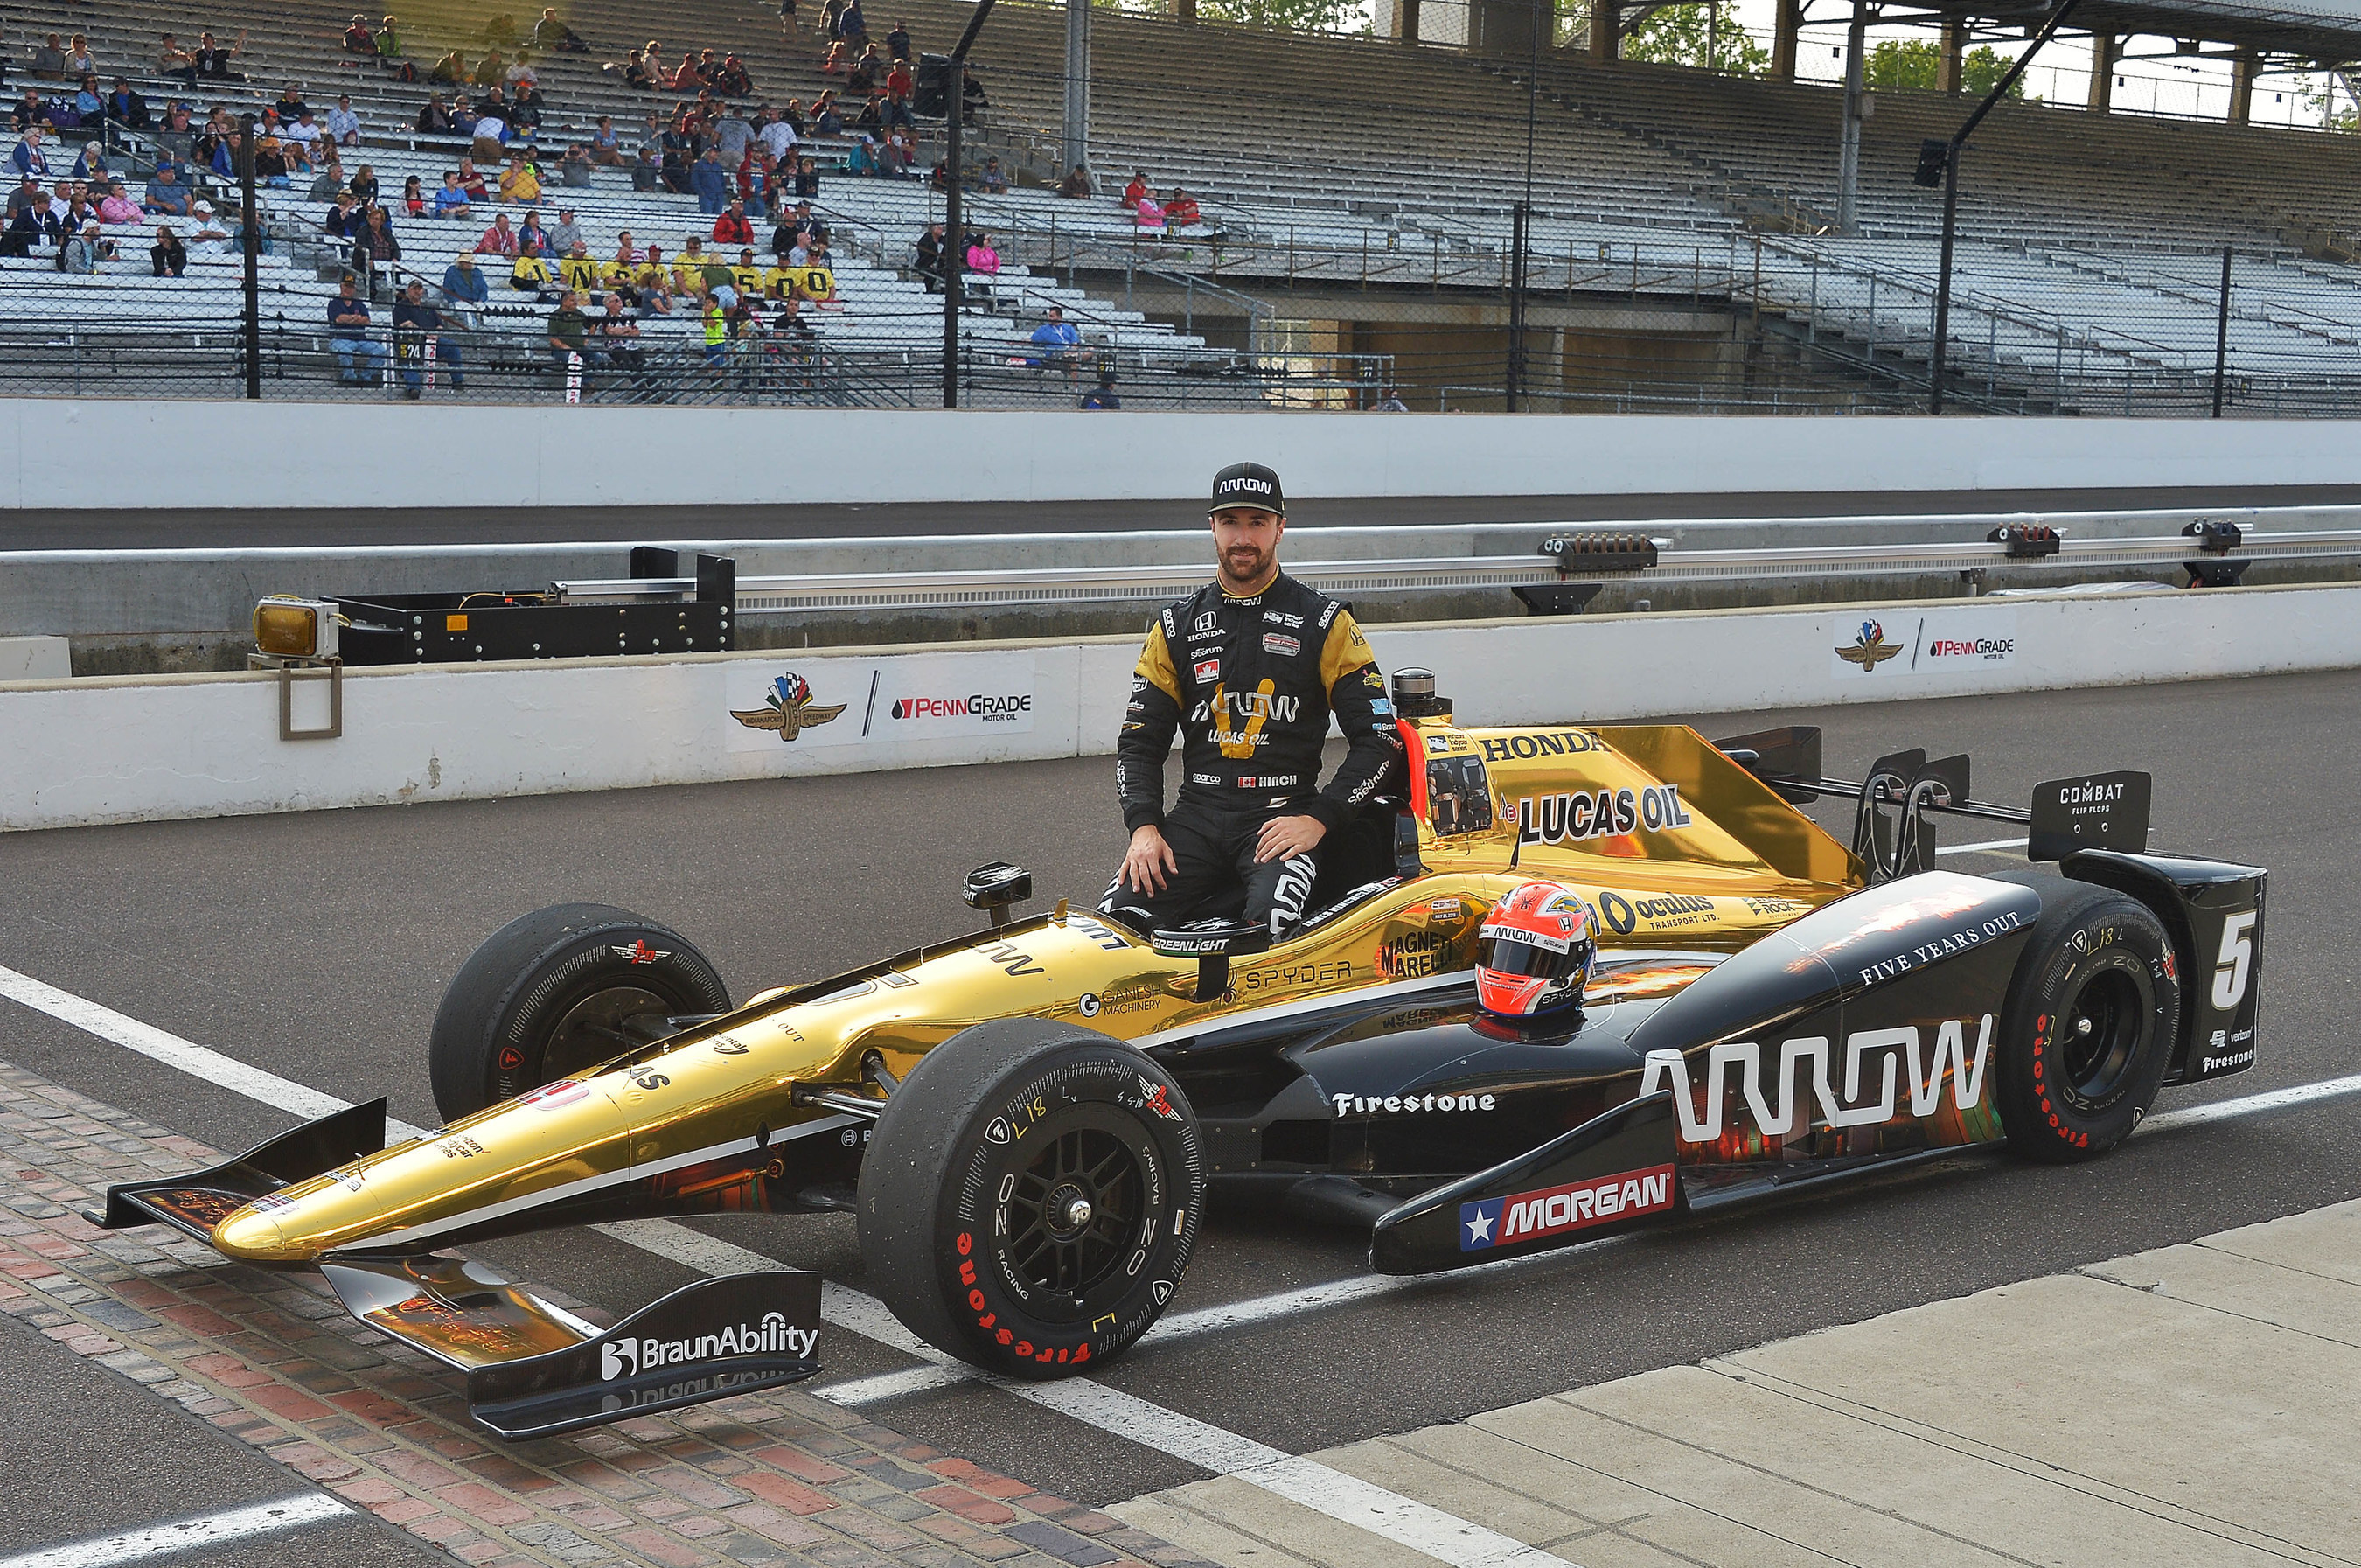 Honda's James Hinchcliffe will start from the pole in Sunday's 100th running of the Indianapolis 500